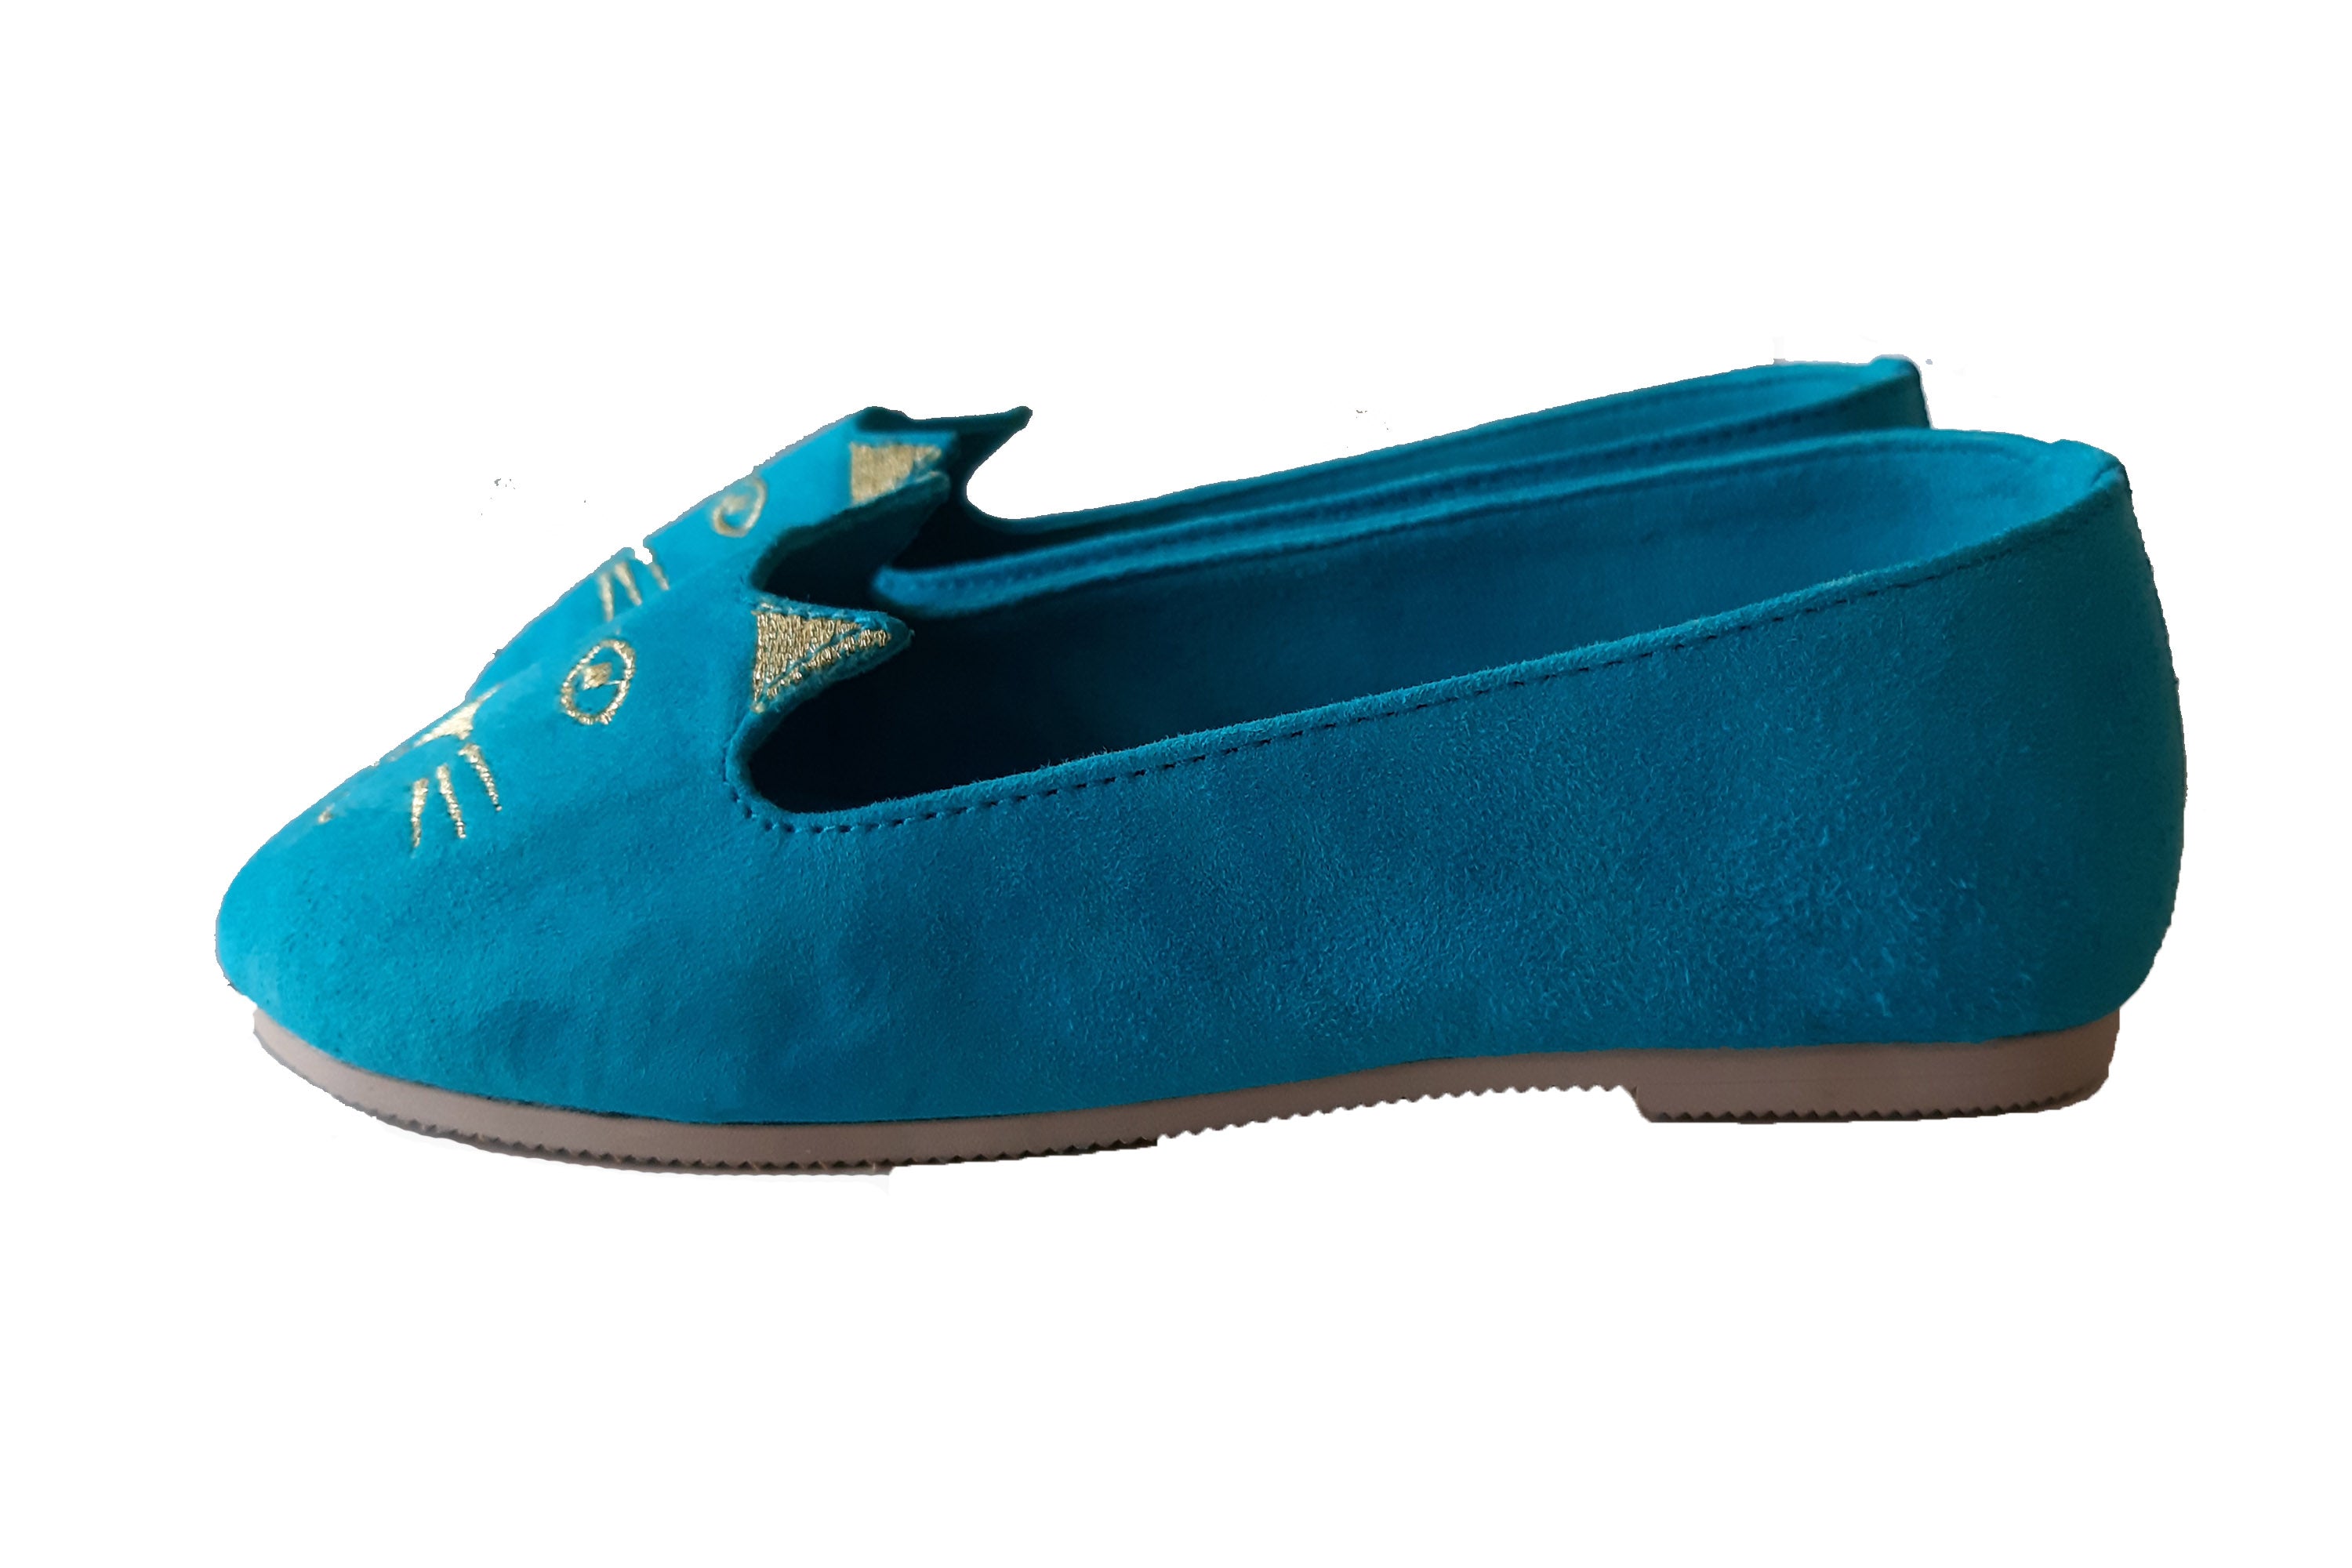 turquoise suede shoes